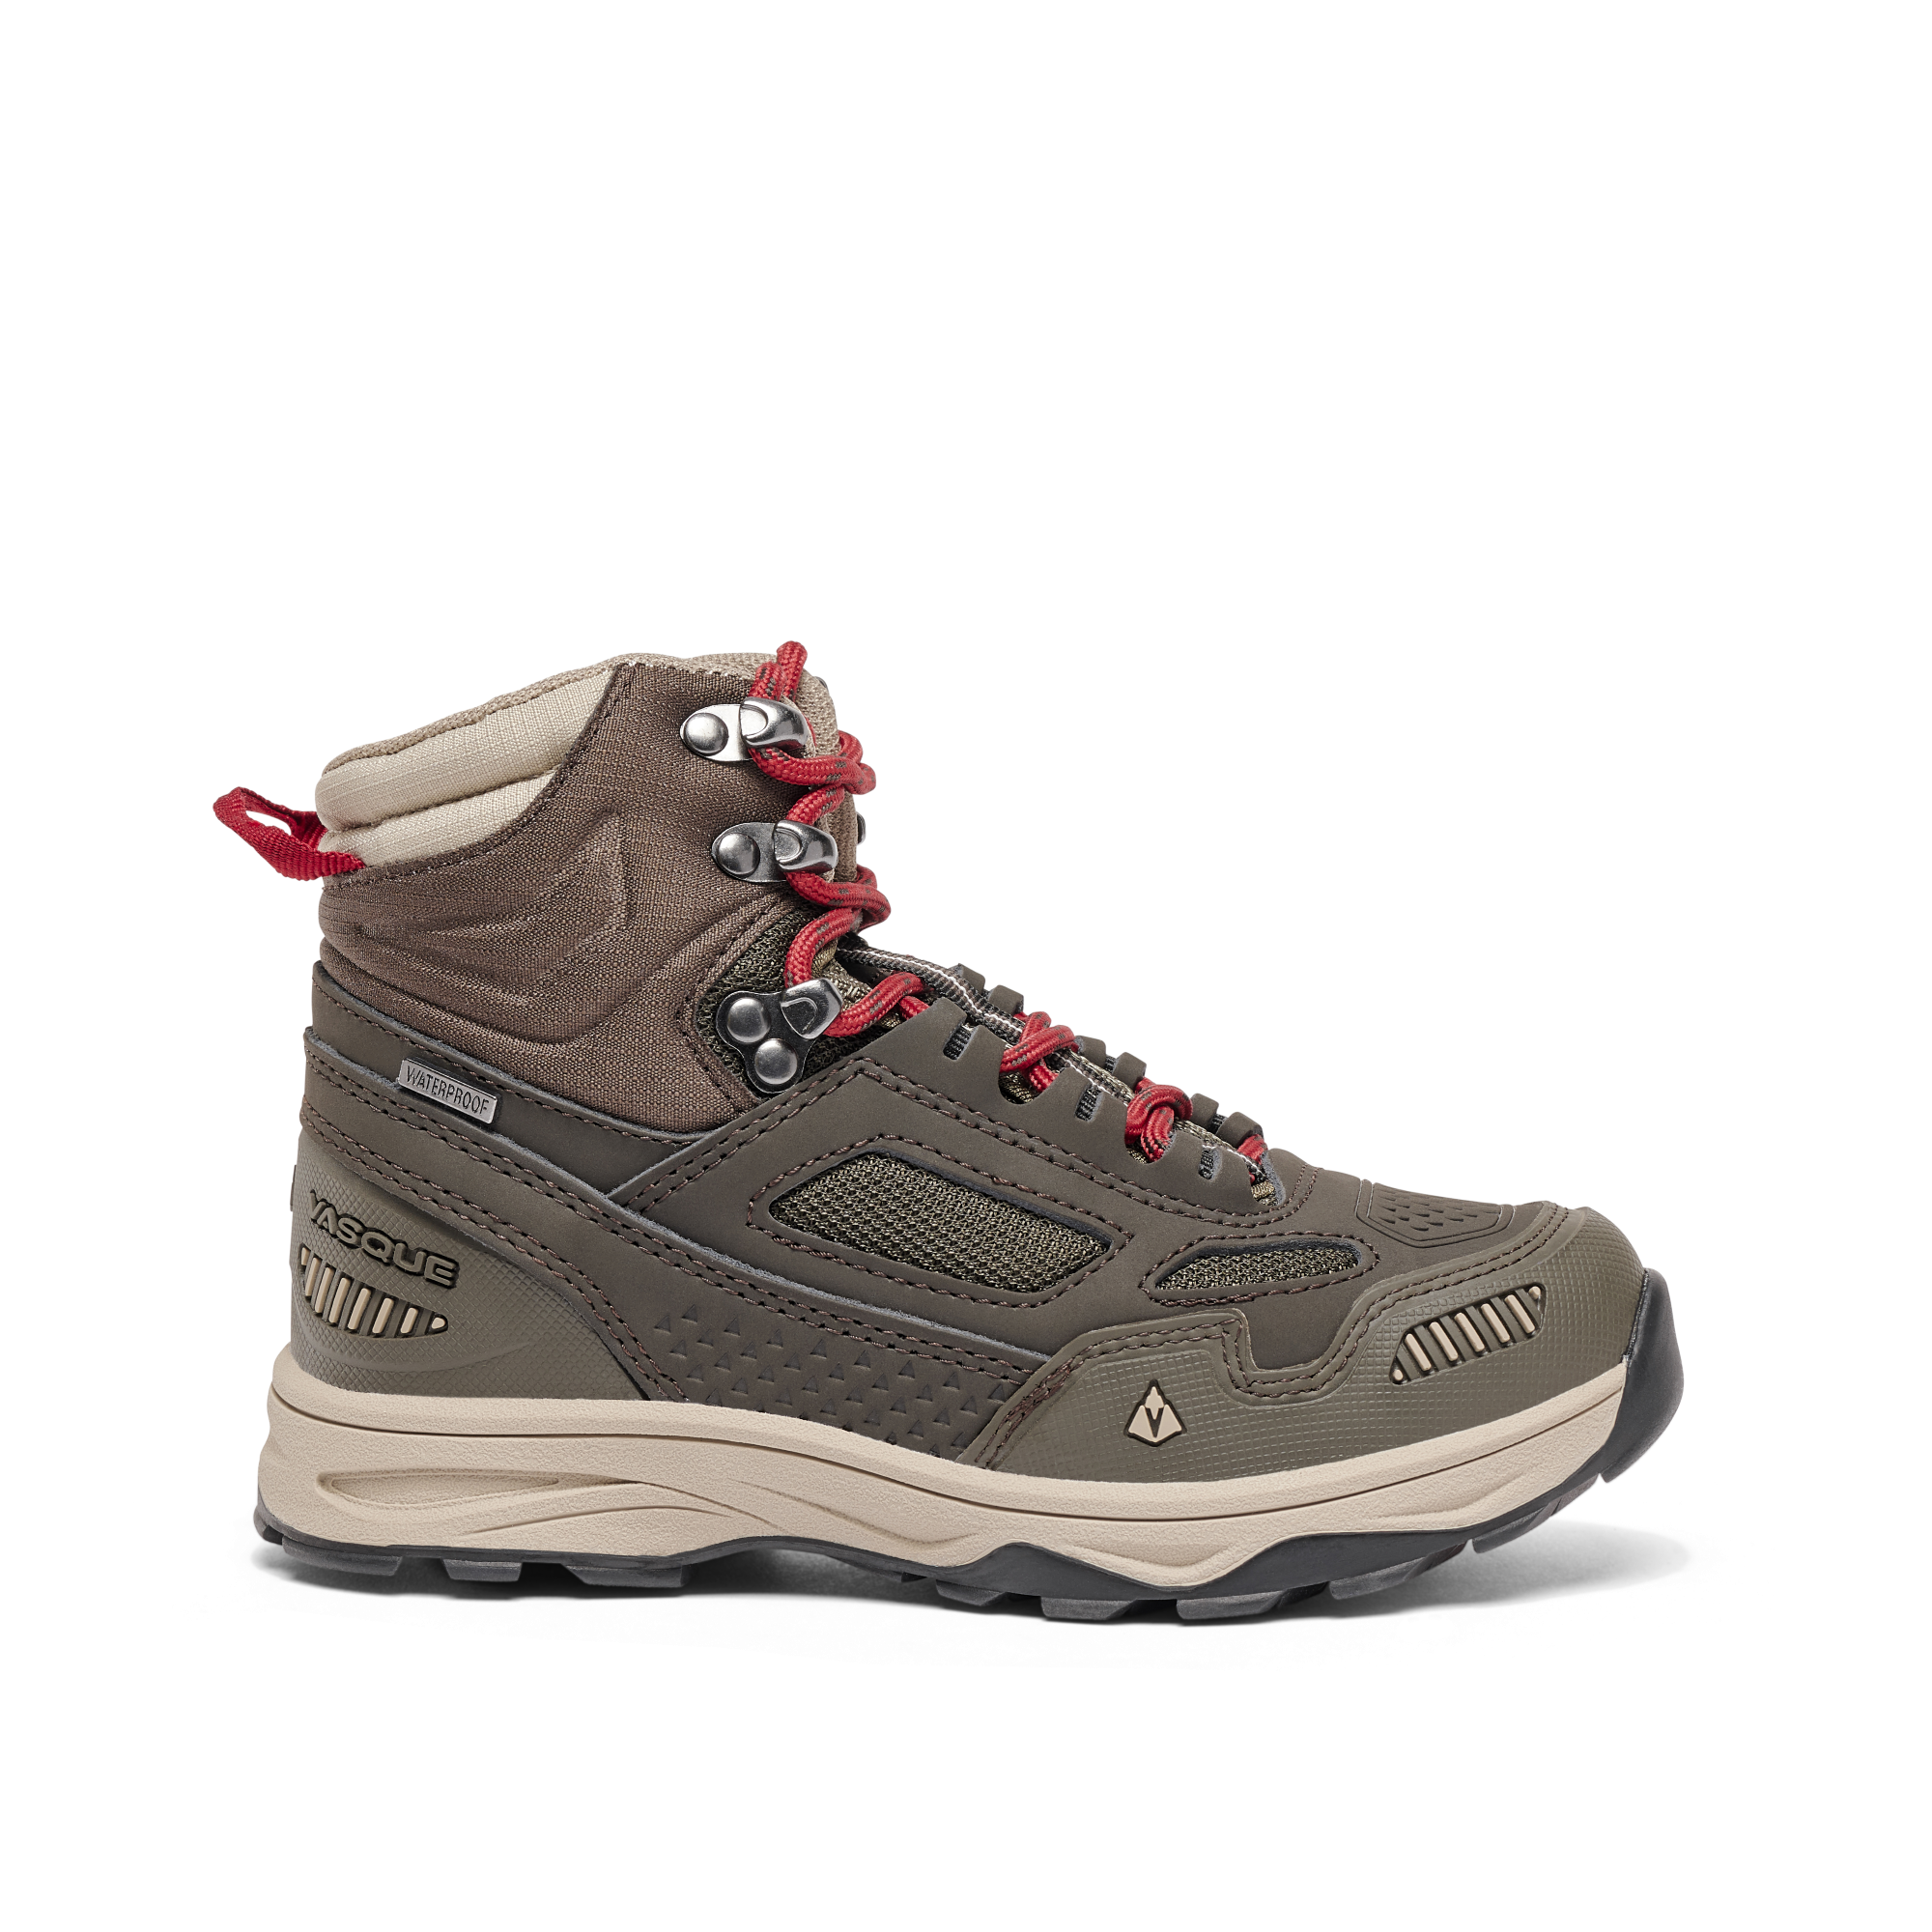 Vasque Breeze AT UltraDry Waterproof Hiking Boots for Kids - Olive - 4 Kids